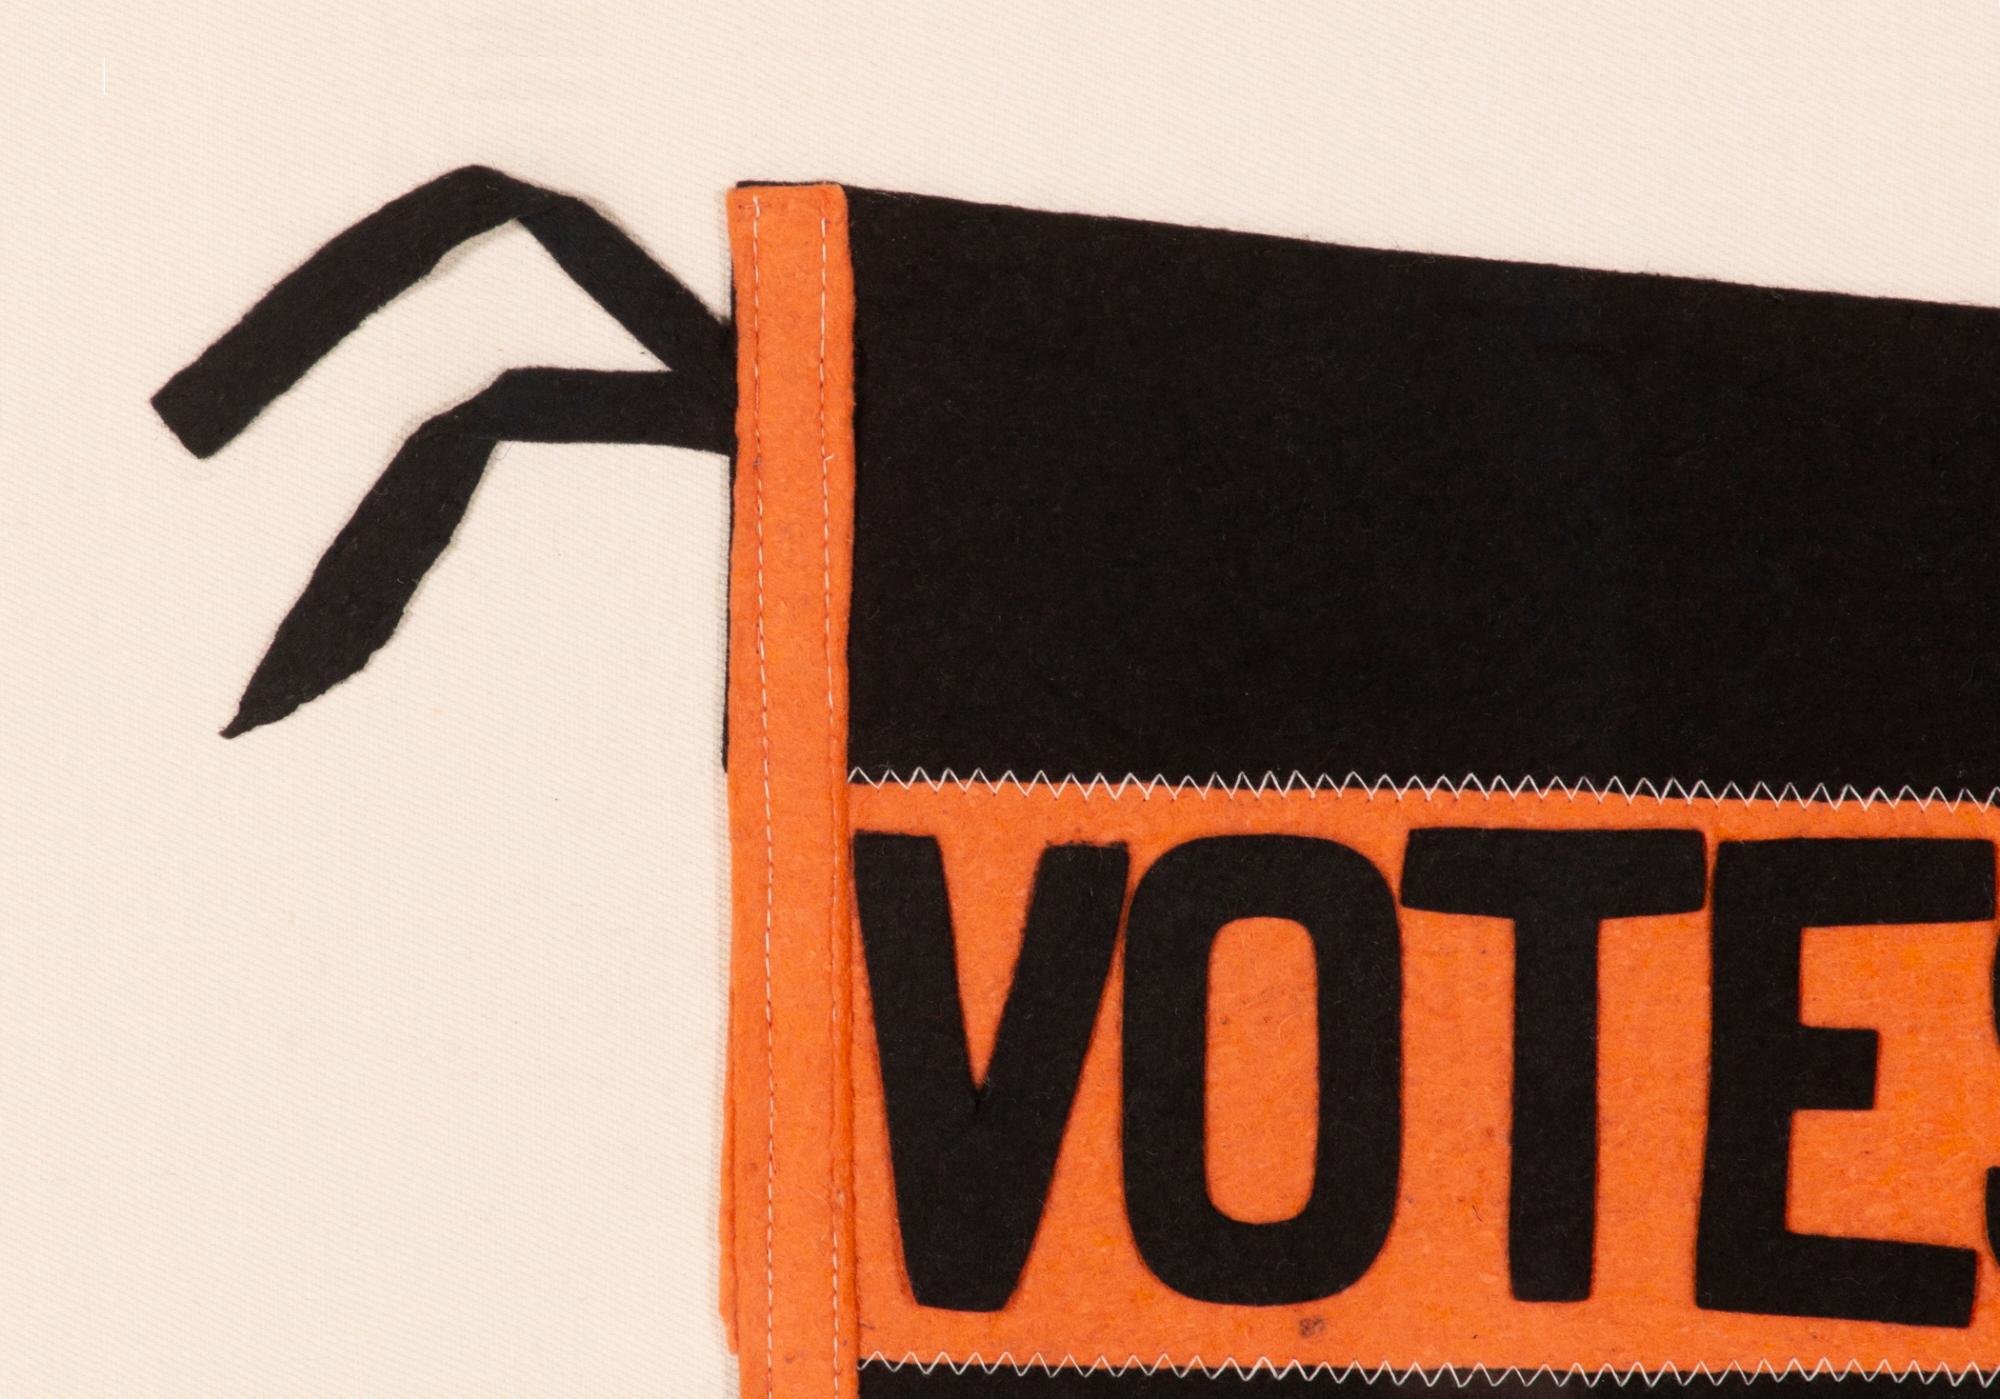 Large, swallow tailed, suffragette pennant in a black & orange color combination unique to this example, with applied lettering that reads 